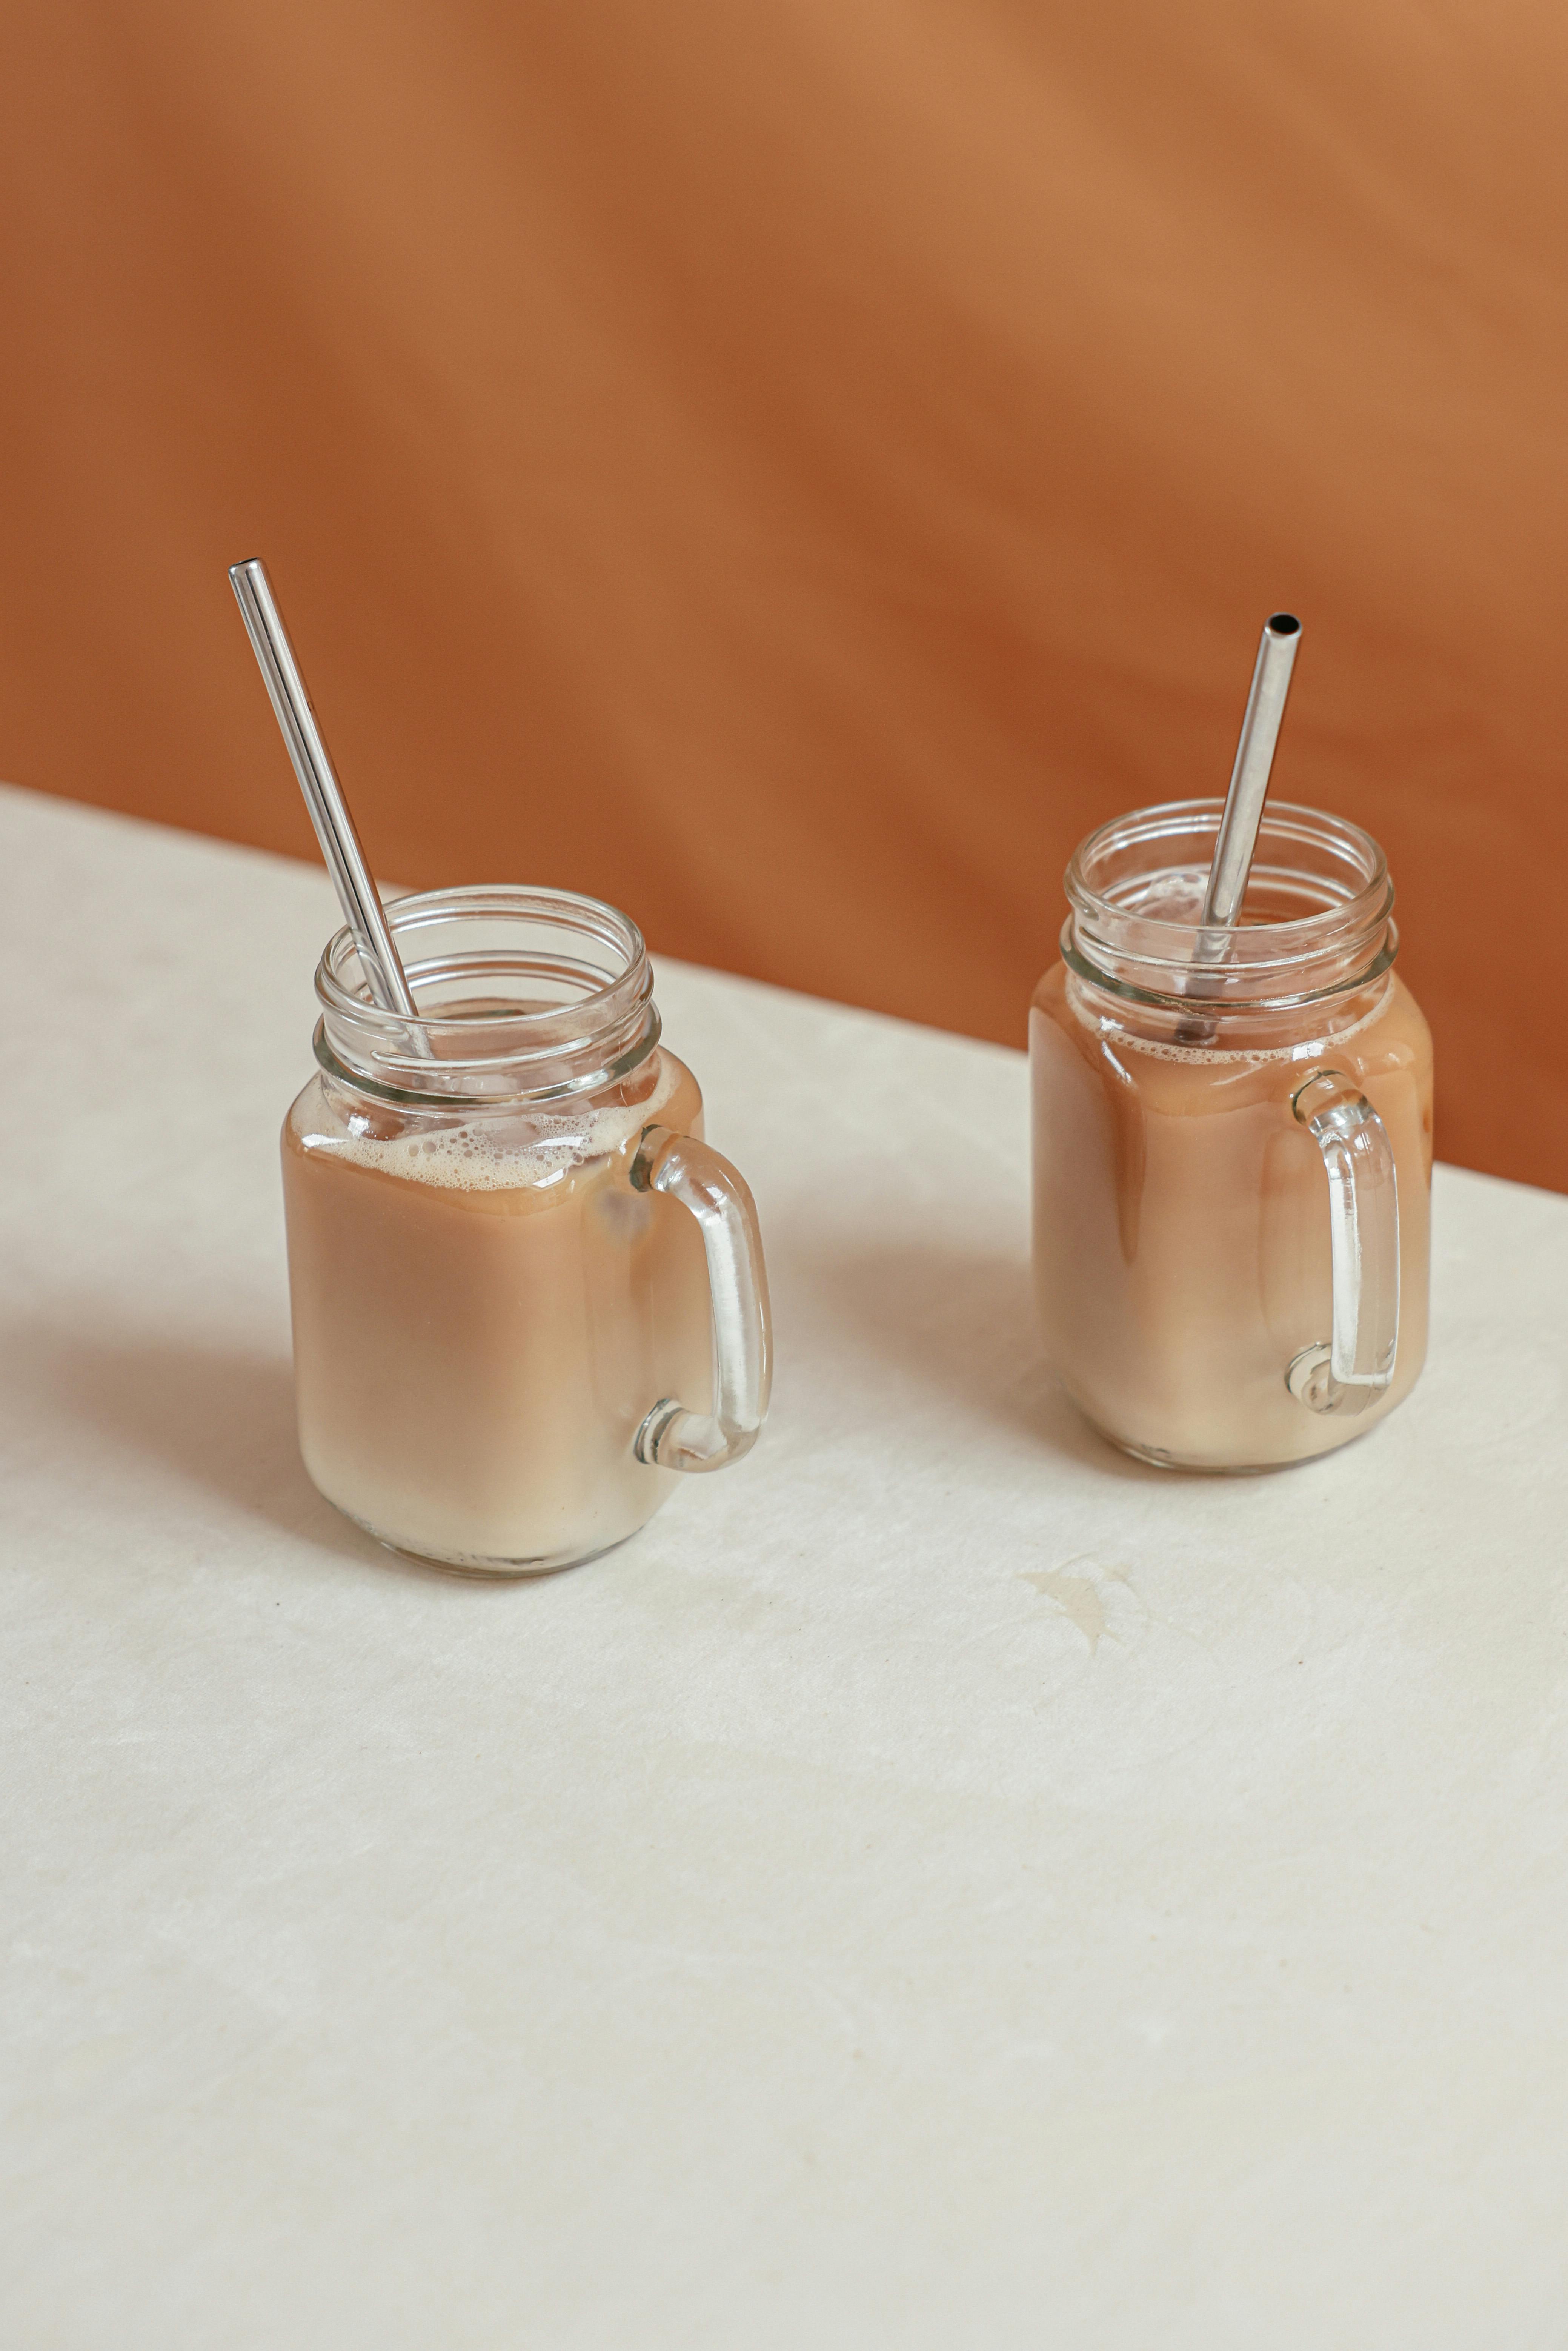 Iced Coffee in Cup Glass Vertical Shot in Studio Stock Photo - Image of  cold, cool: 150296002